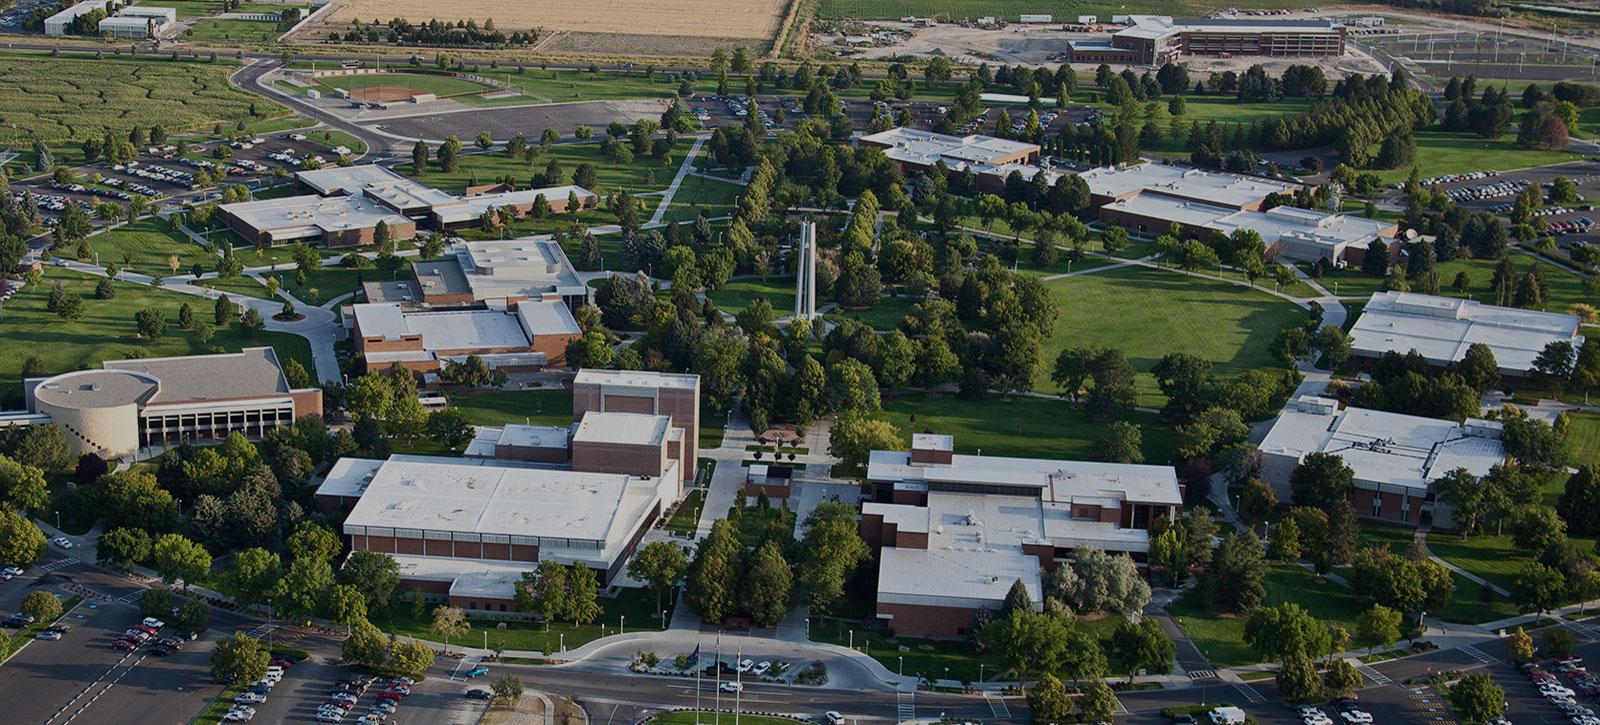 An aerial photograph of the College of Southern Idaho's campus